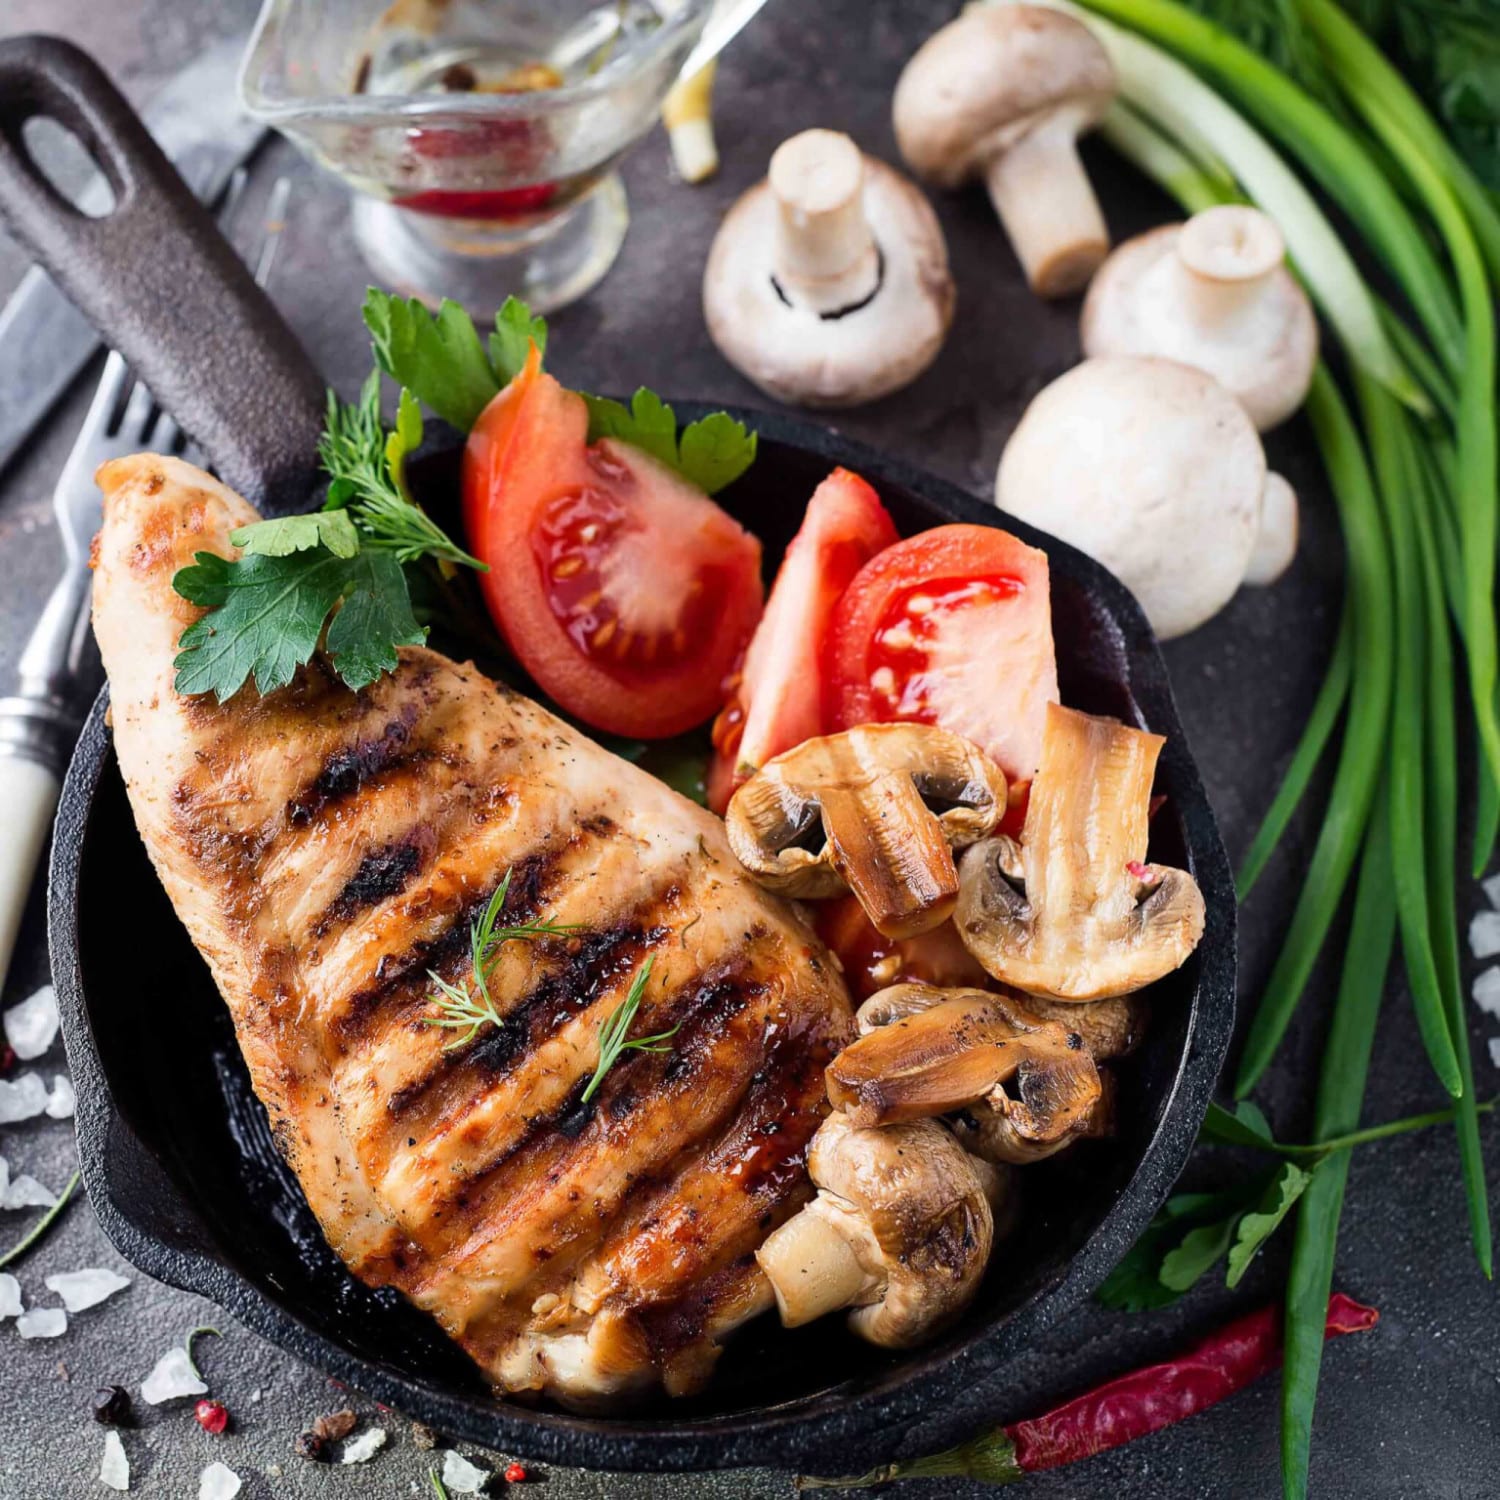 Foodie Fit - Chicken Breast Build Your Own Meals, healthy meal delivery Vancouver